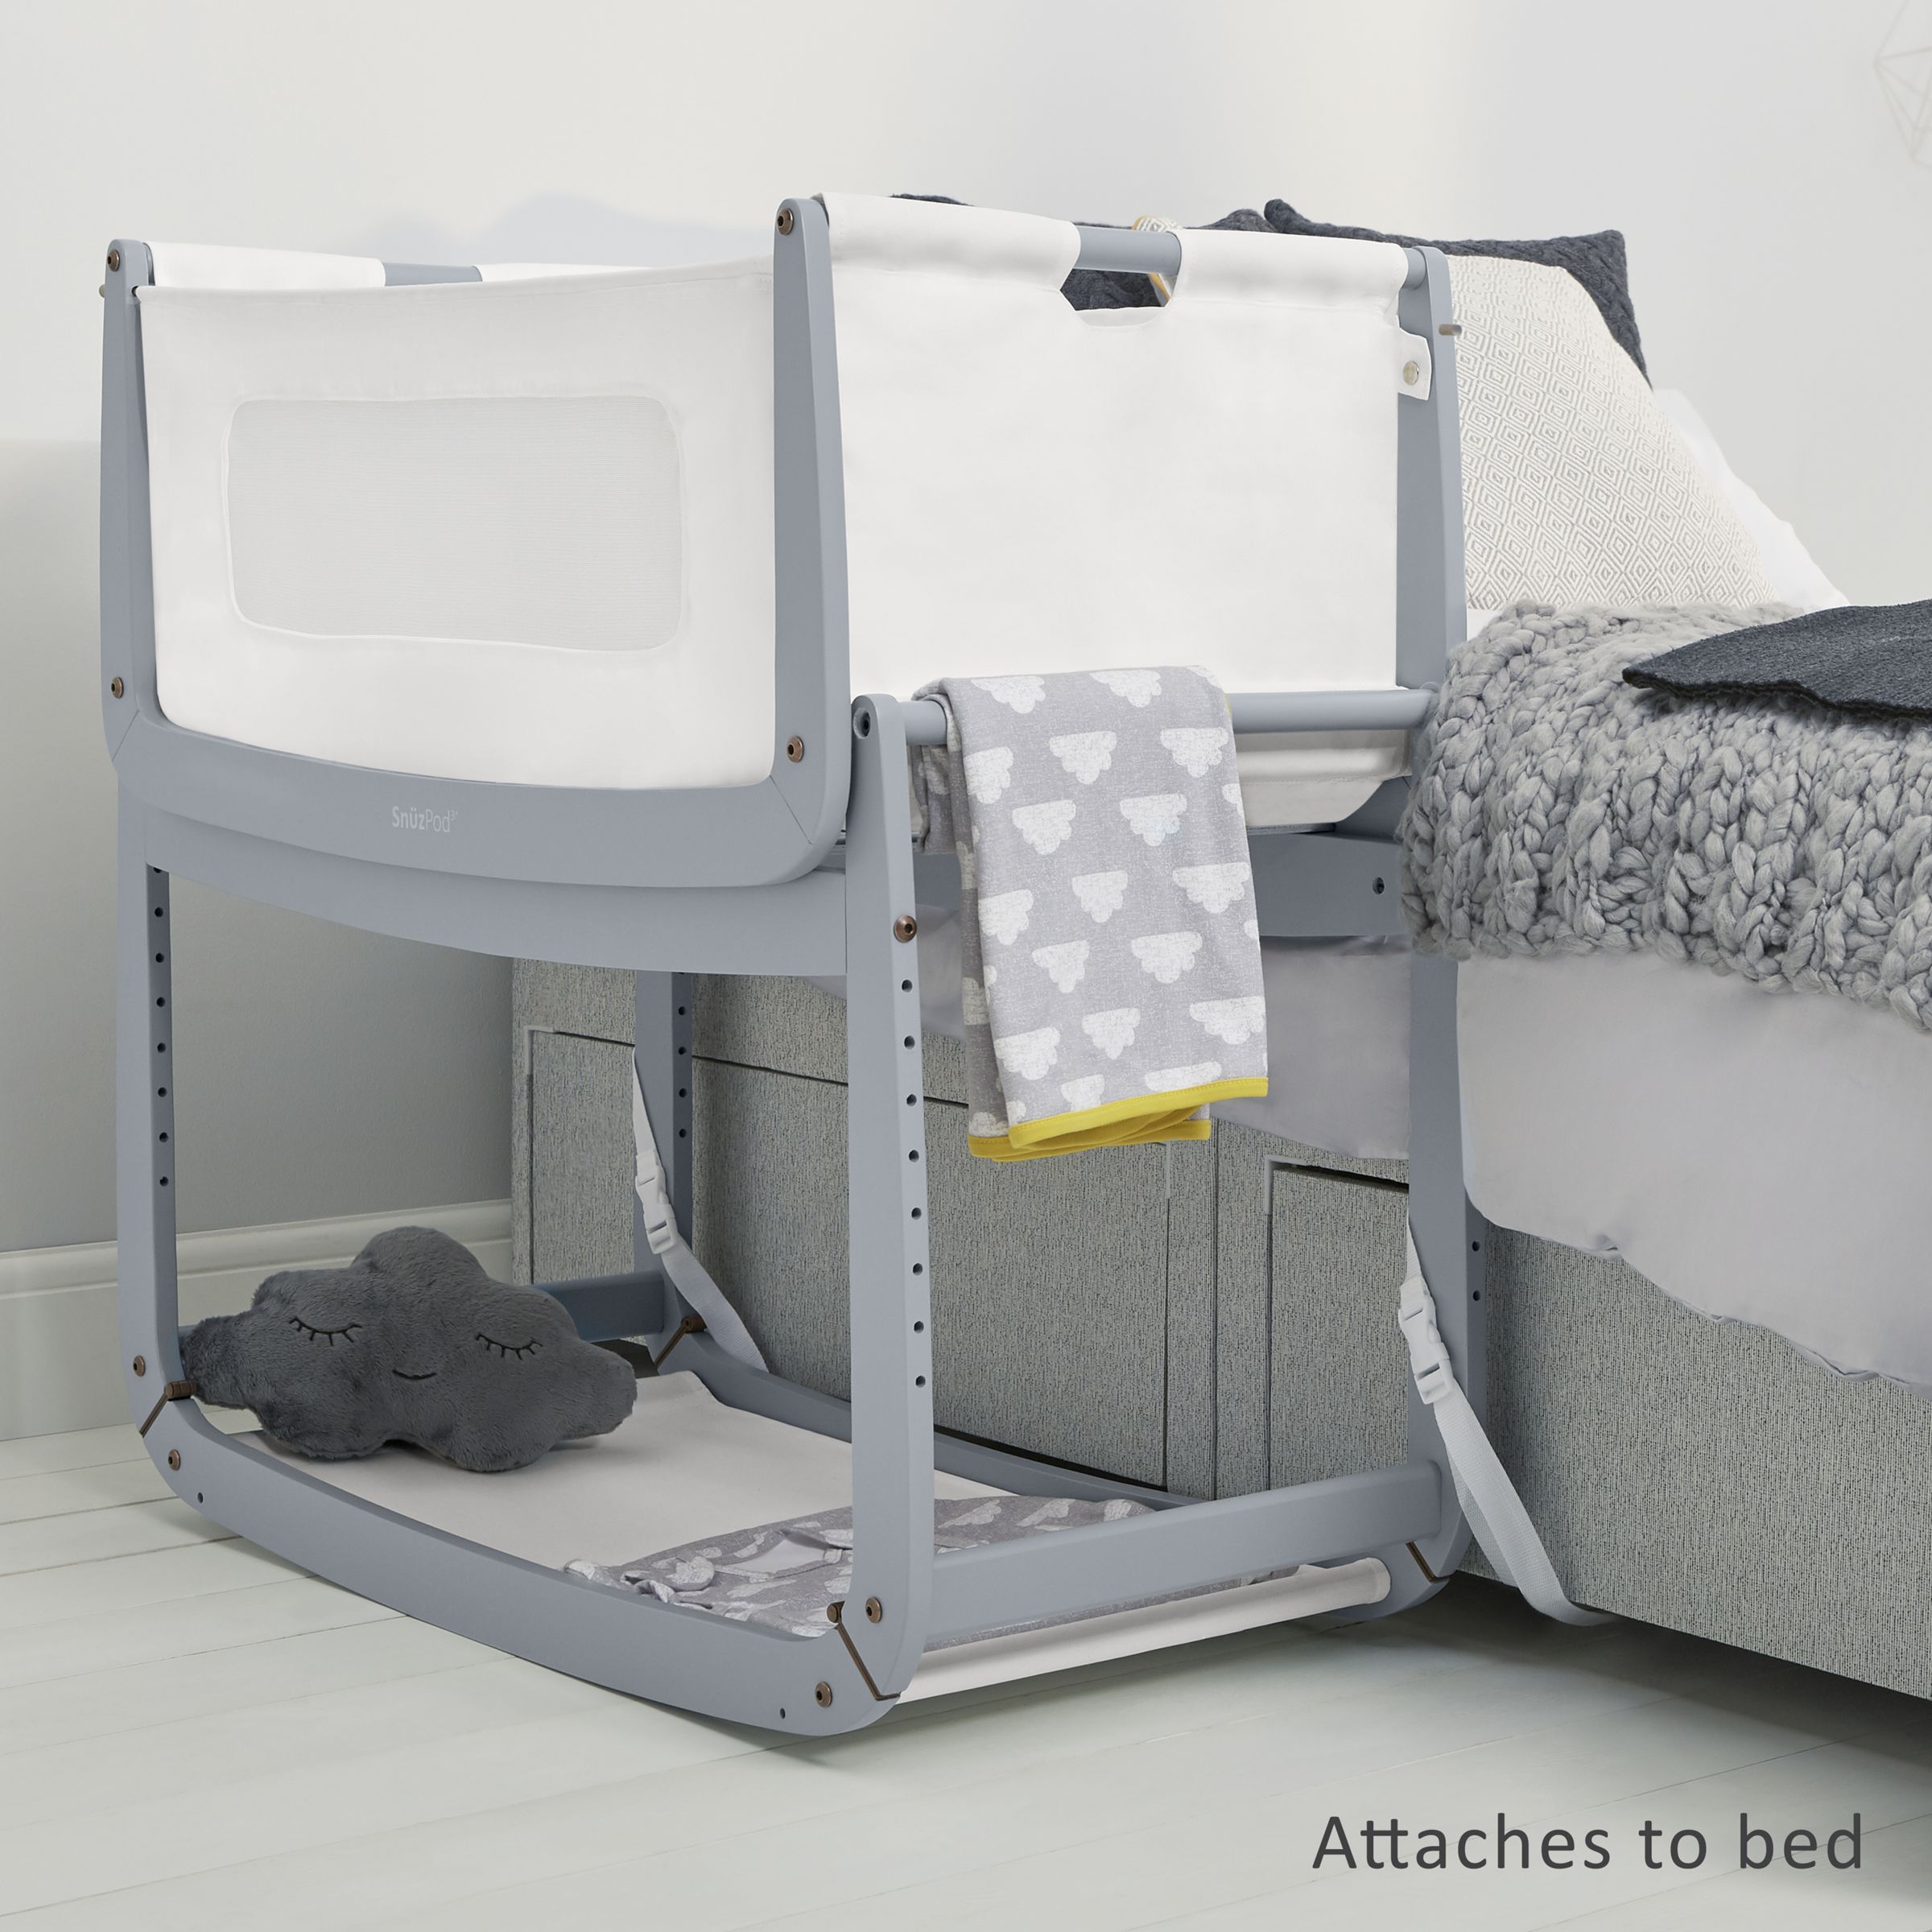 crib that attaches to bed